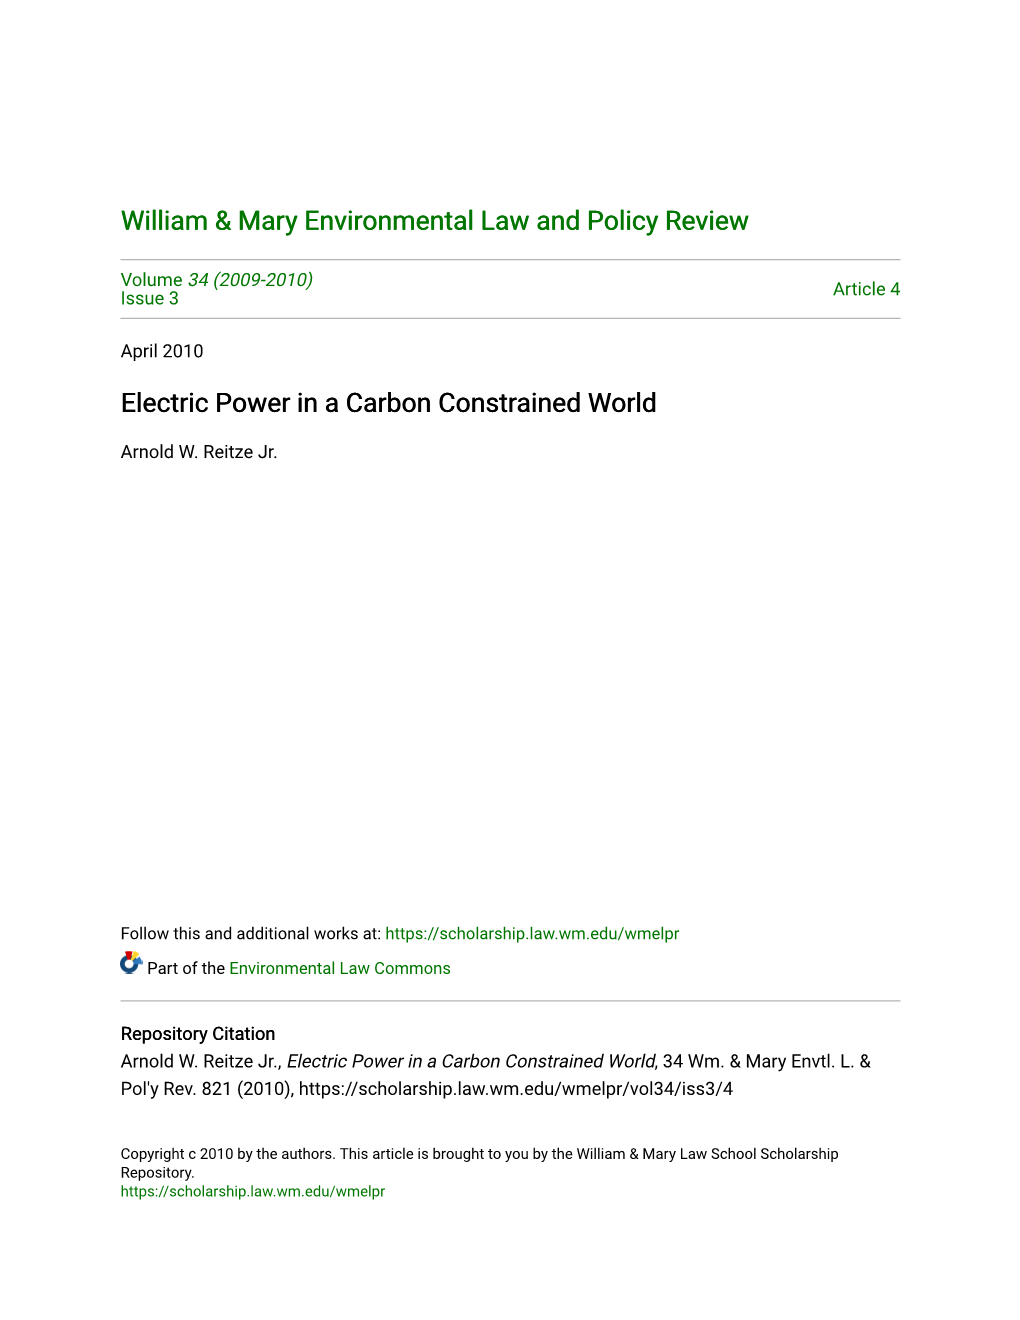 Electric Power in a Carbon Constrained World